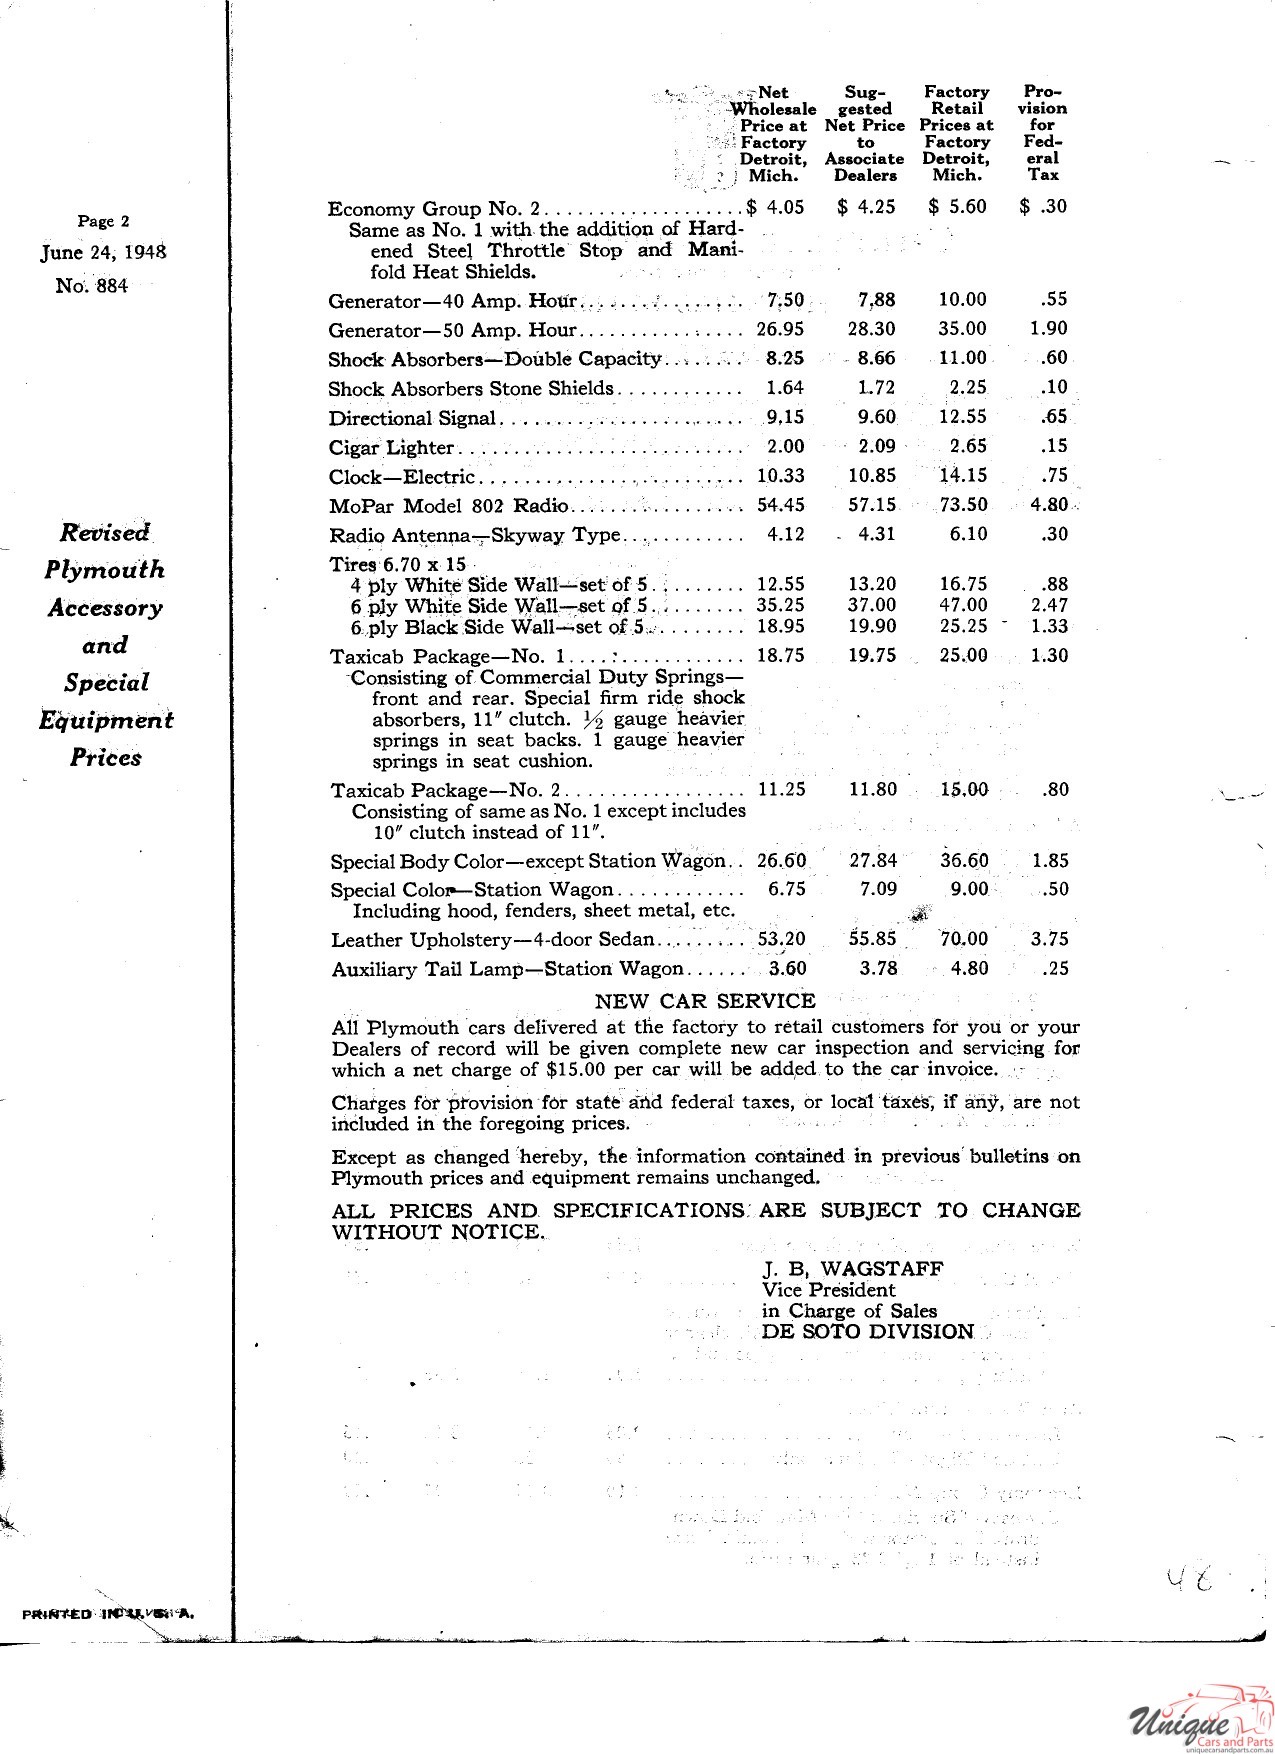 1948 Plymouth Revised Accessory Price List Page 1